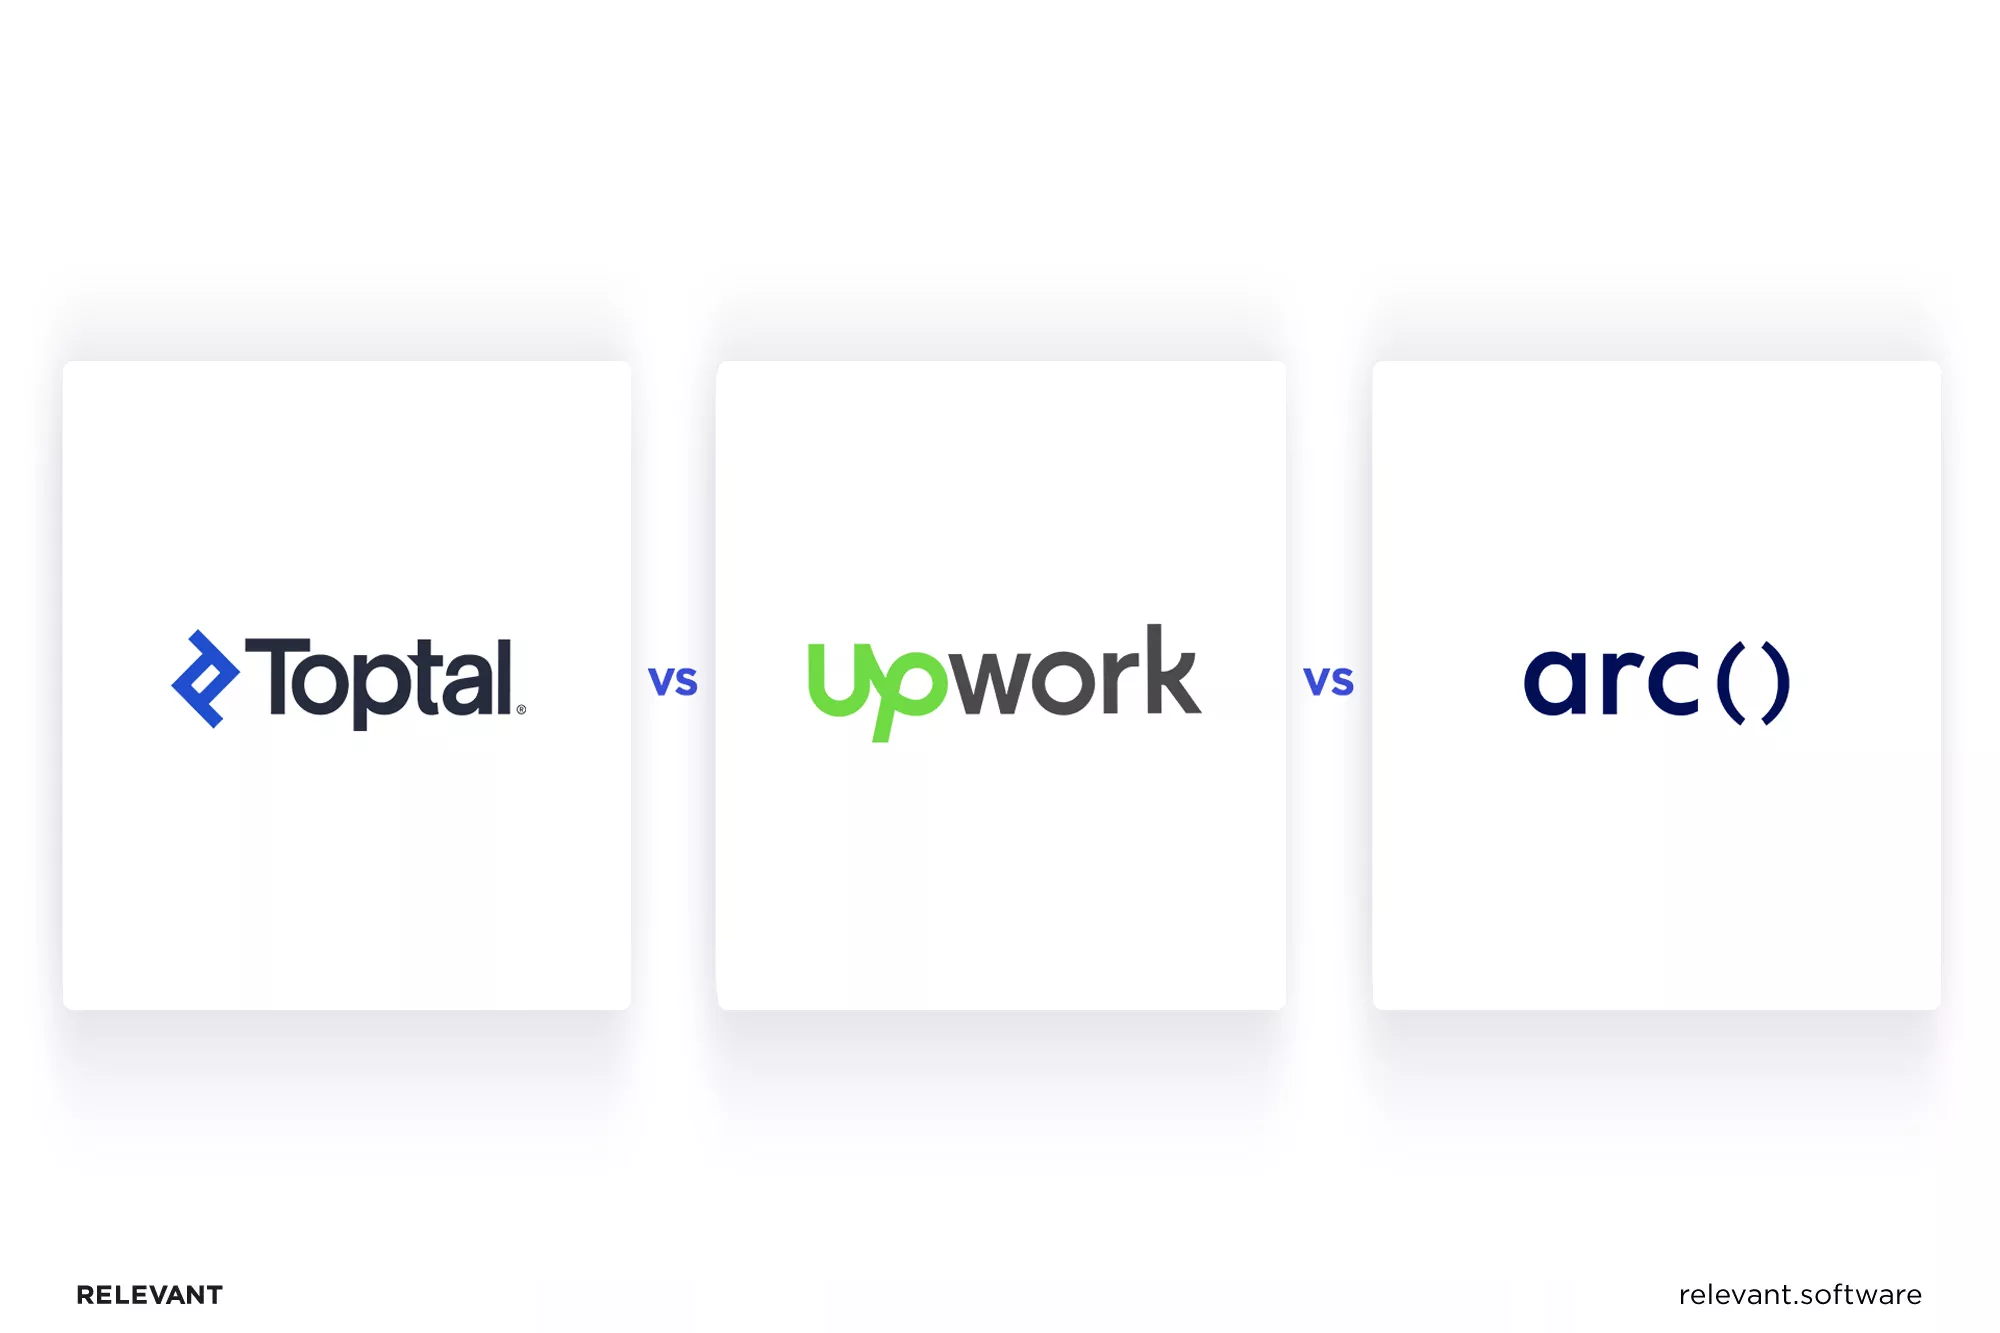 What are the benefits of being top rated on UpWork? - Quora